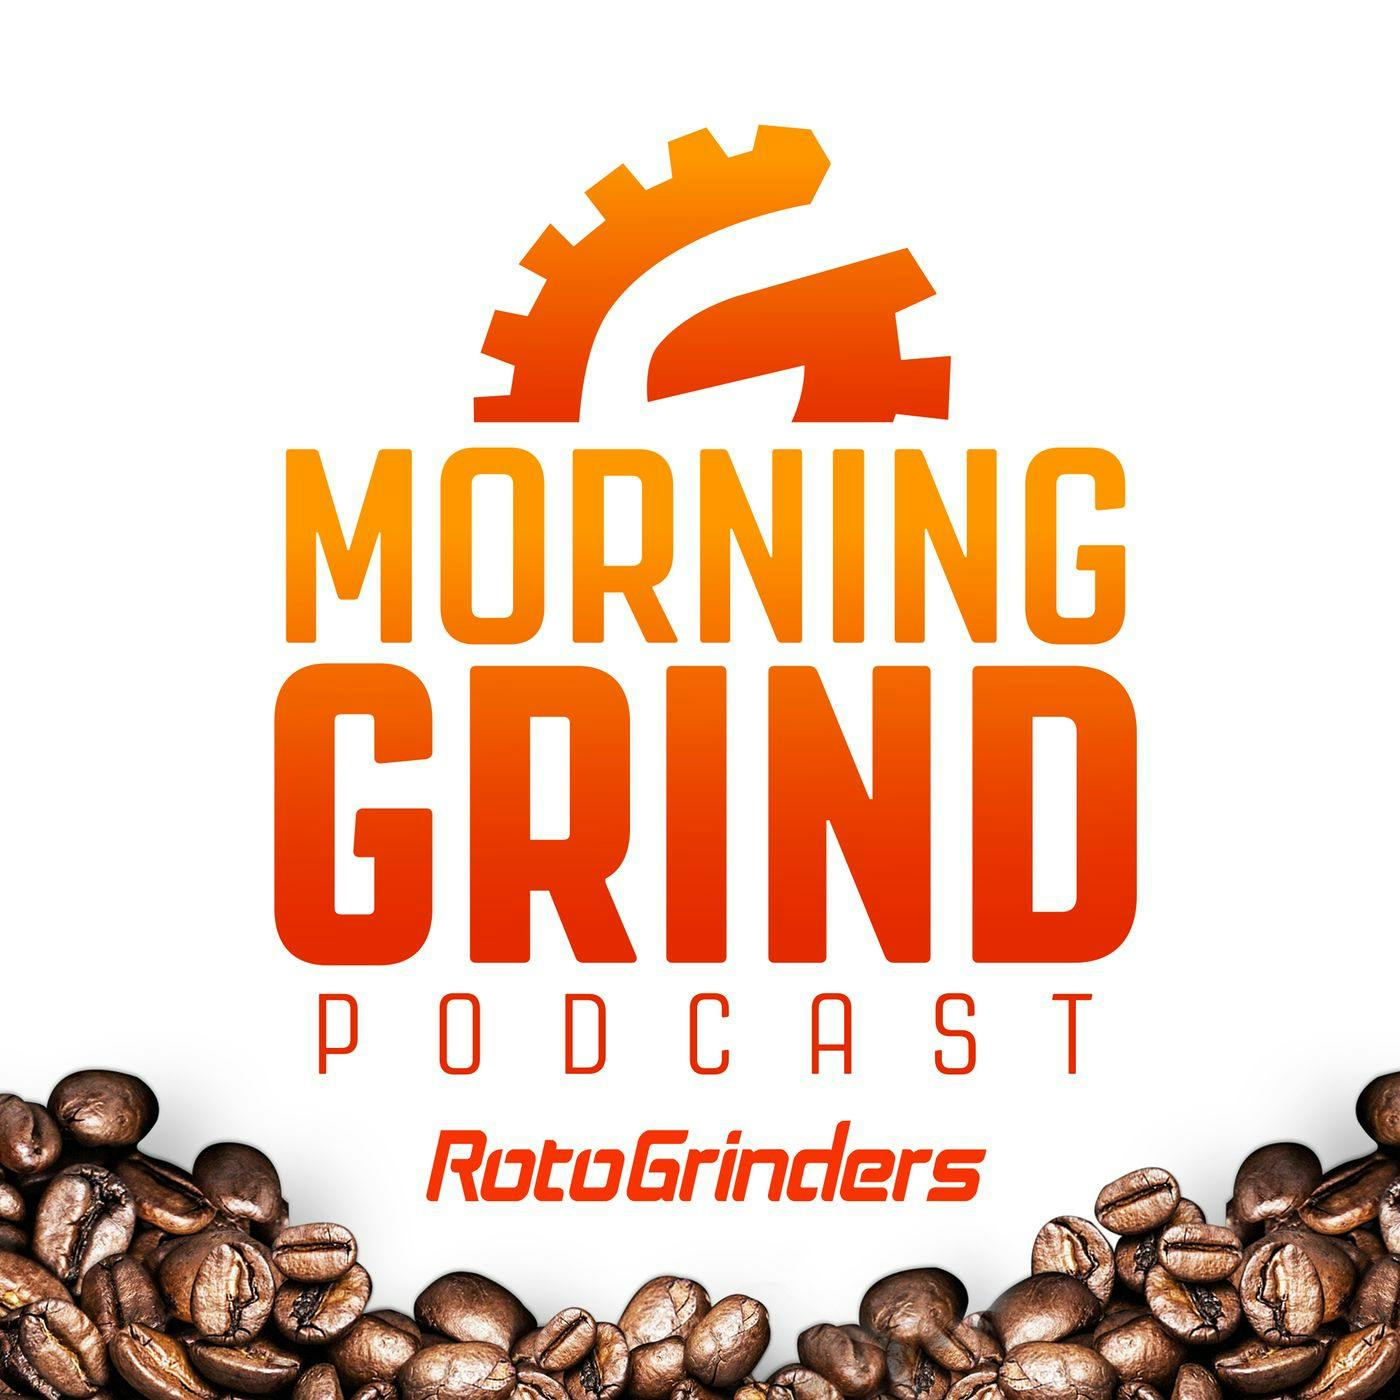 Daily Fantasy League of Legends Morning Grind: 3/17/2020